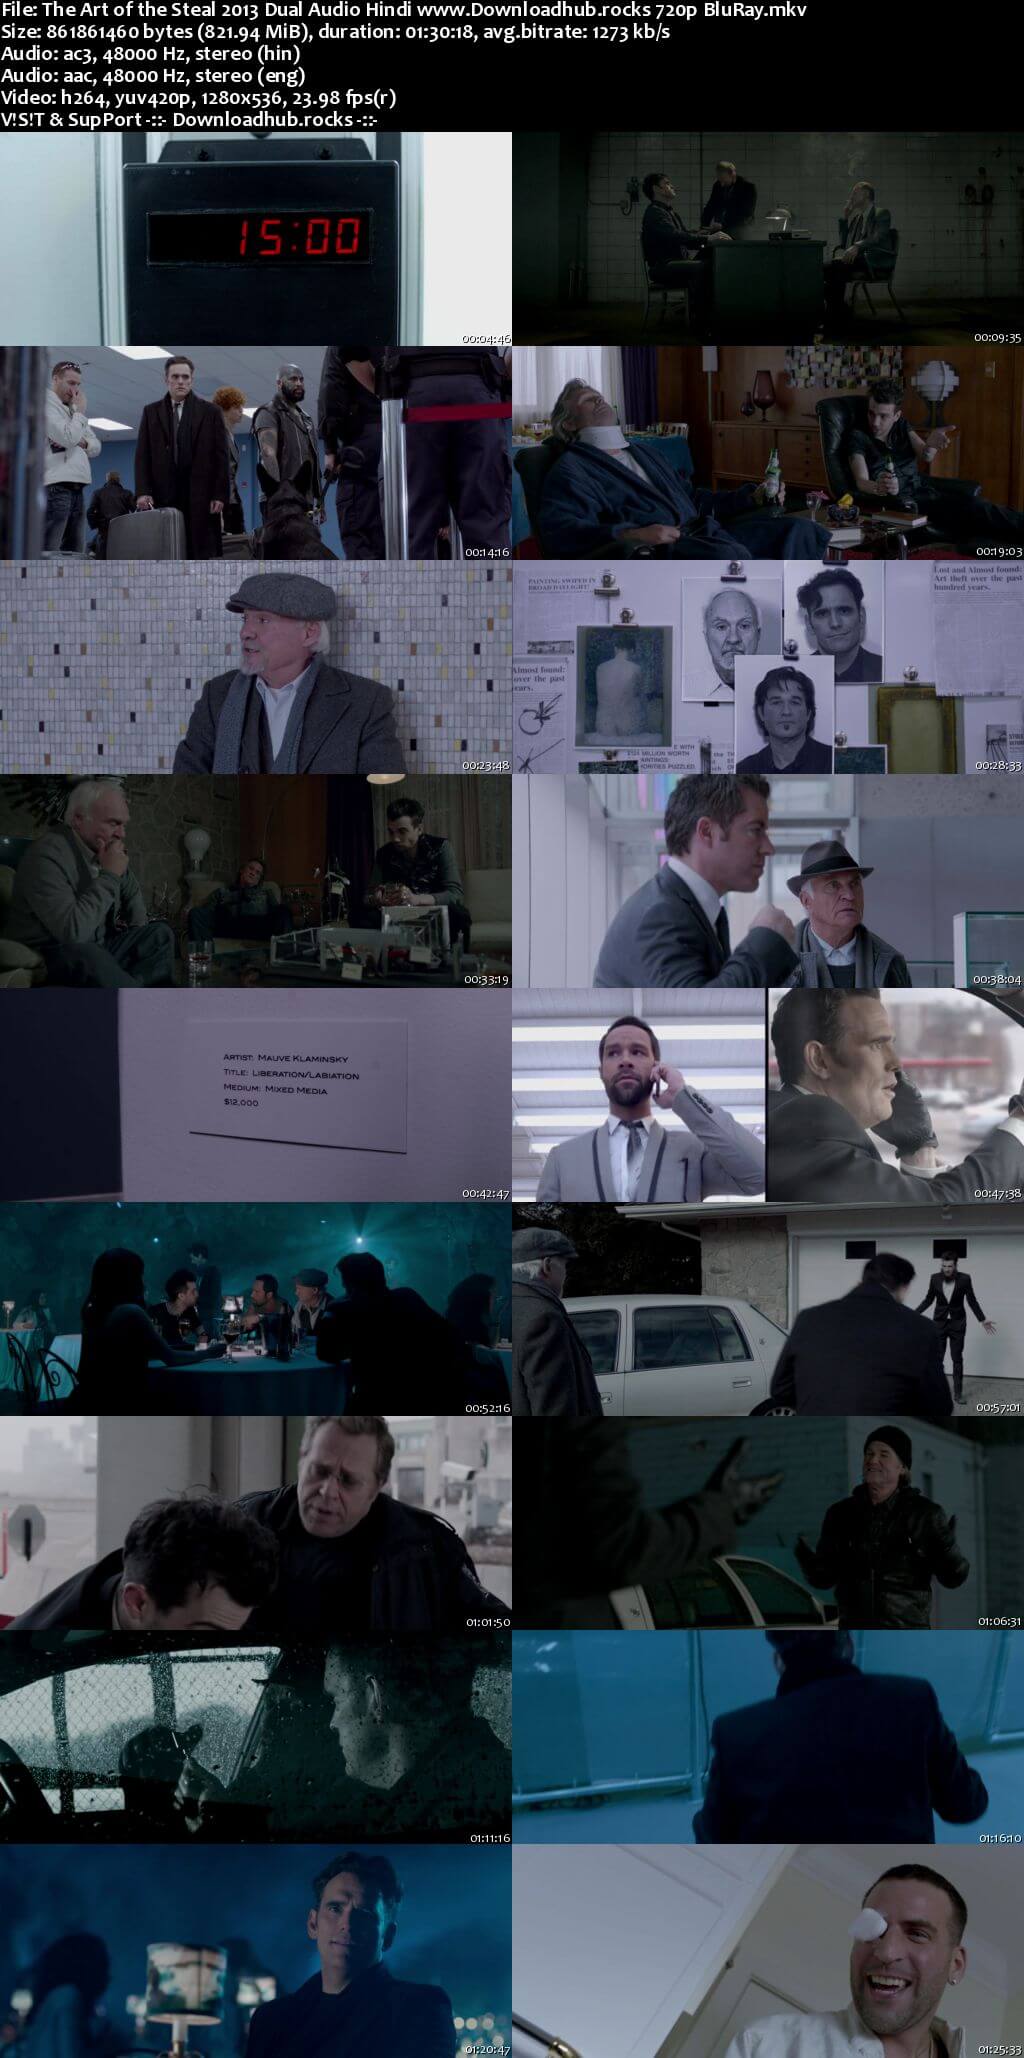 The Art of the Steal 2013 Hindi Dual Audio 720p BluRay ESubs